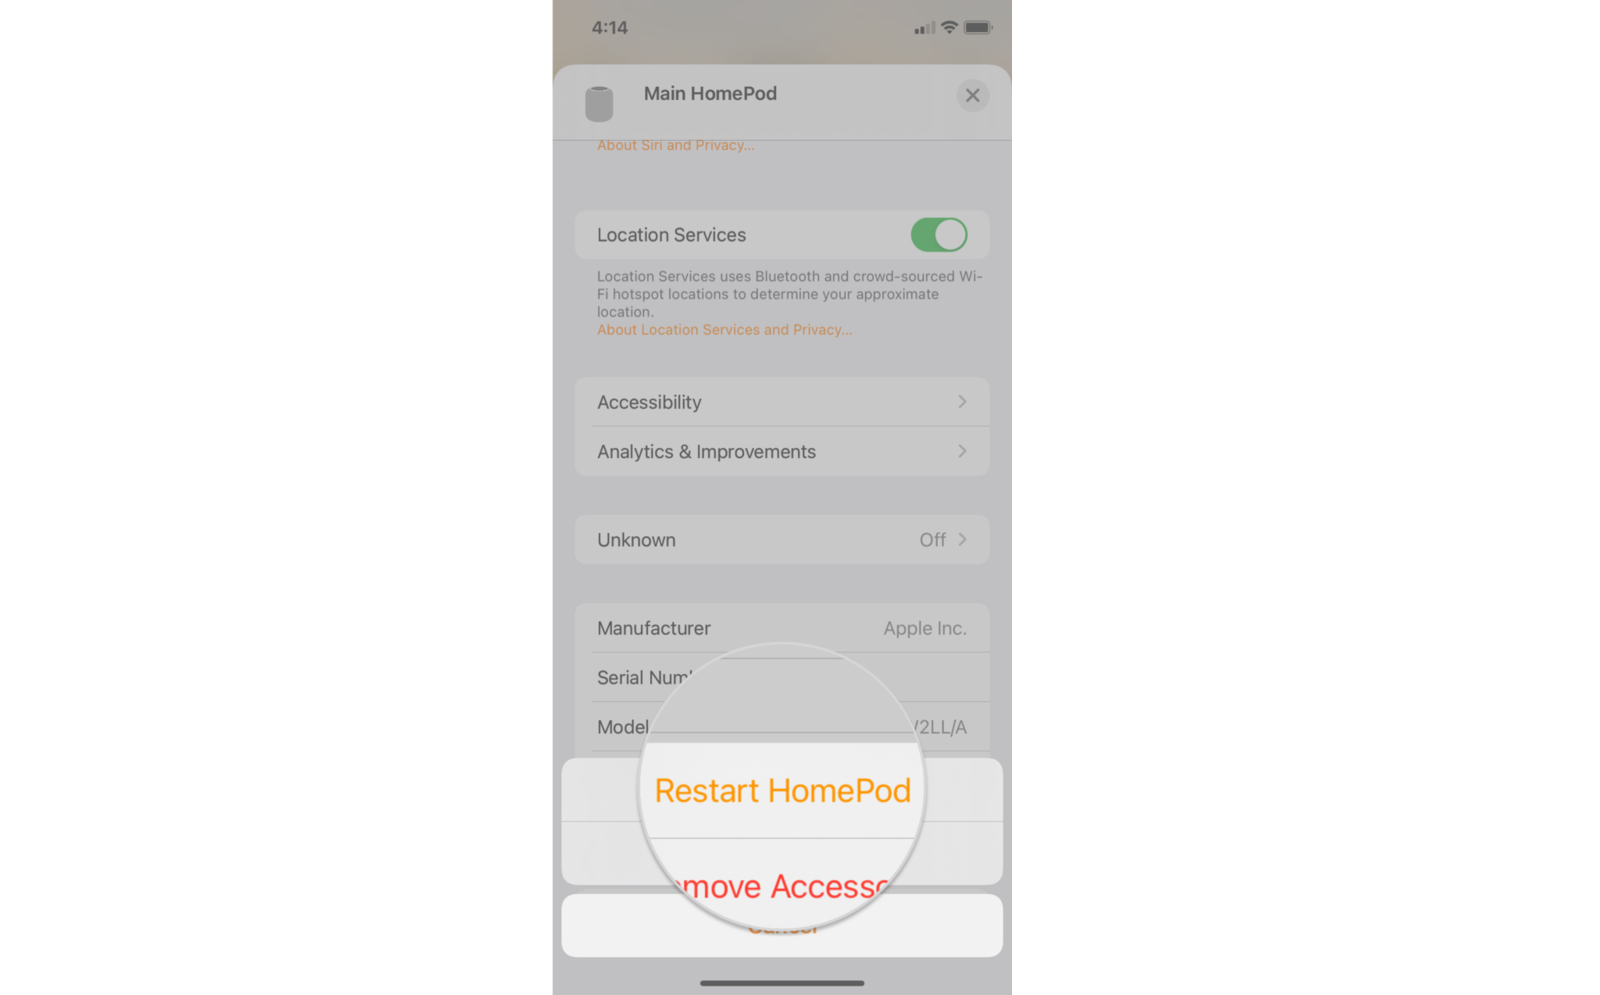 How to restart the HomePod in the Home app on the iPhone by showing steps: Tap Restart HomePod